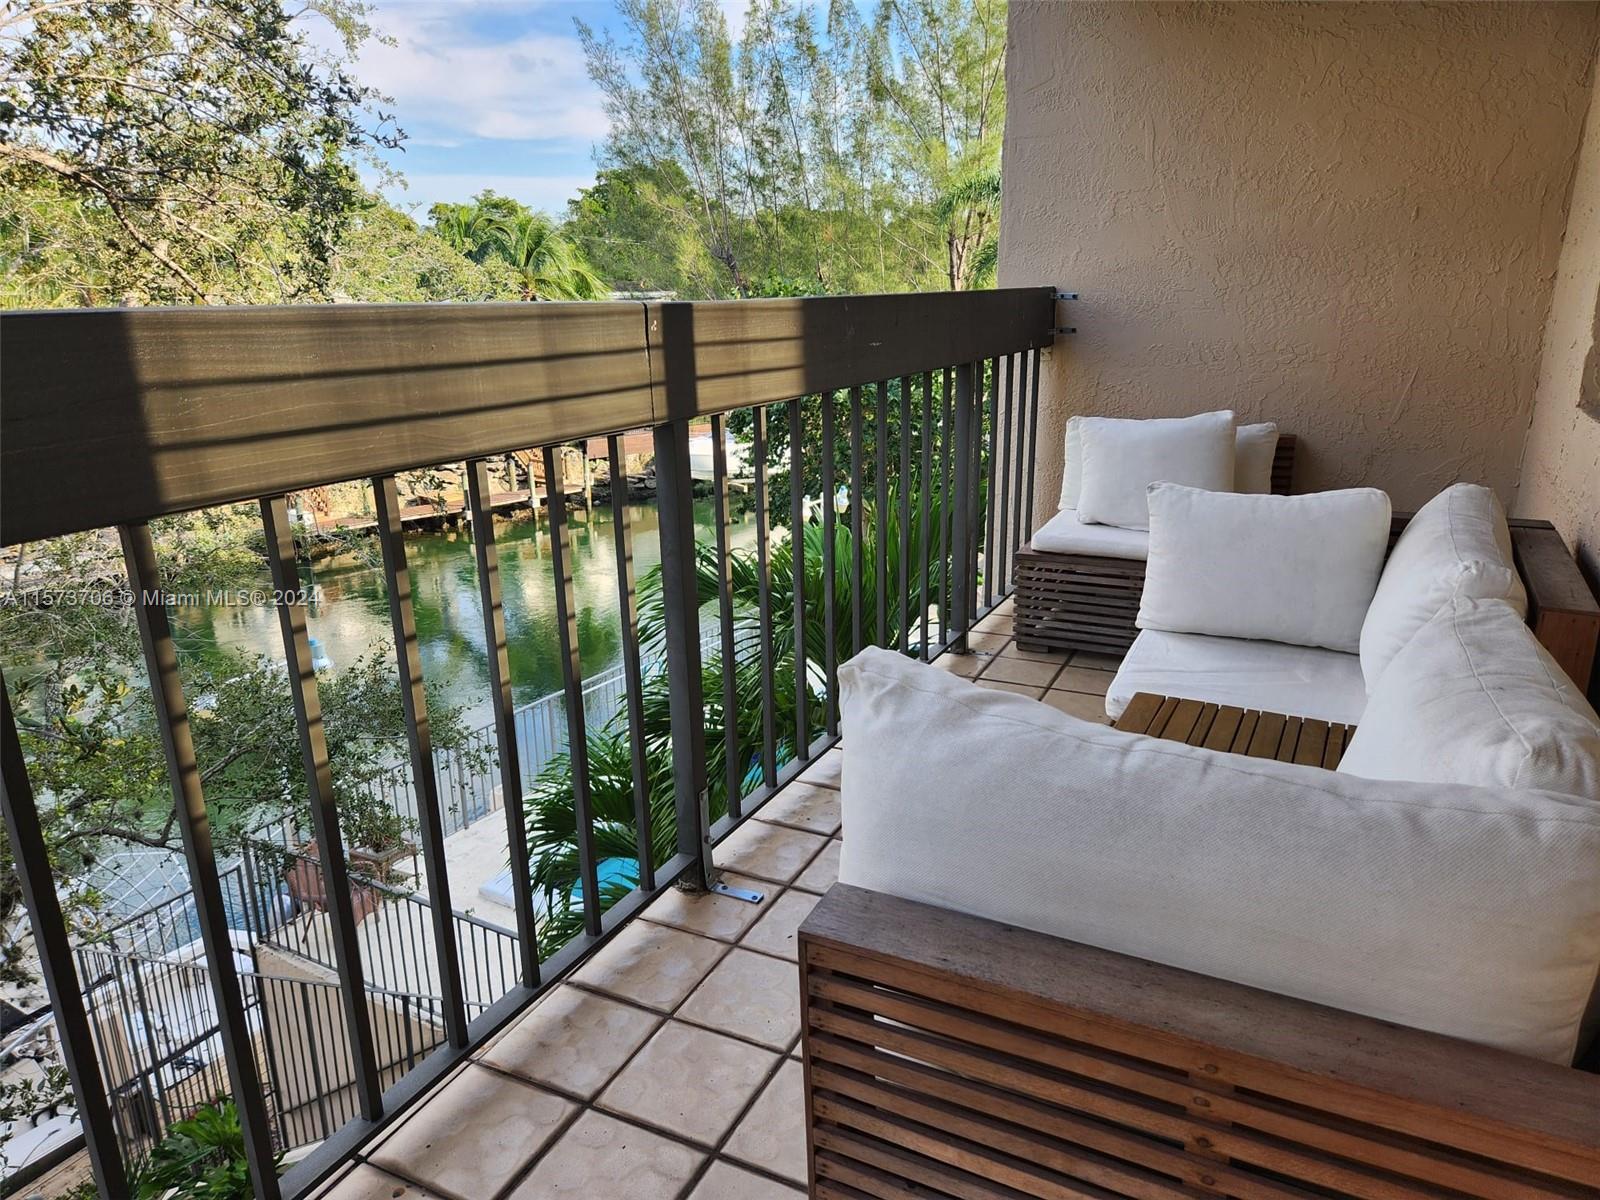 Hidden gem on the Coral Gables waterway! Enjoy lush landscaping and amazing canal views from your private balcony, lots of natural light and vaulted ceilings. This remodeled unit with s/s appliances, newer a/c, quartz counter tops, newer in unit washer/dryer is located east of US1and has picturesque waterside pool and meeting room. Easy access to US1, University of Miami, Merrick Park and Metrorail. No Students